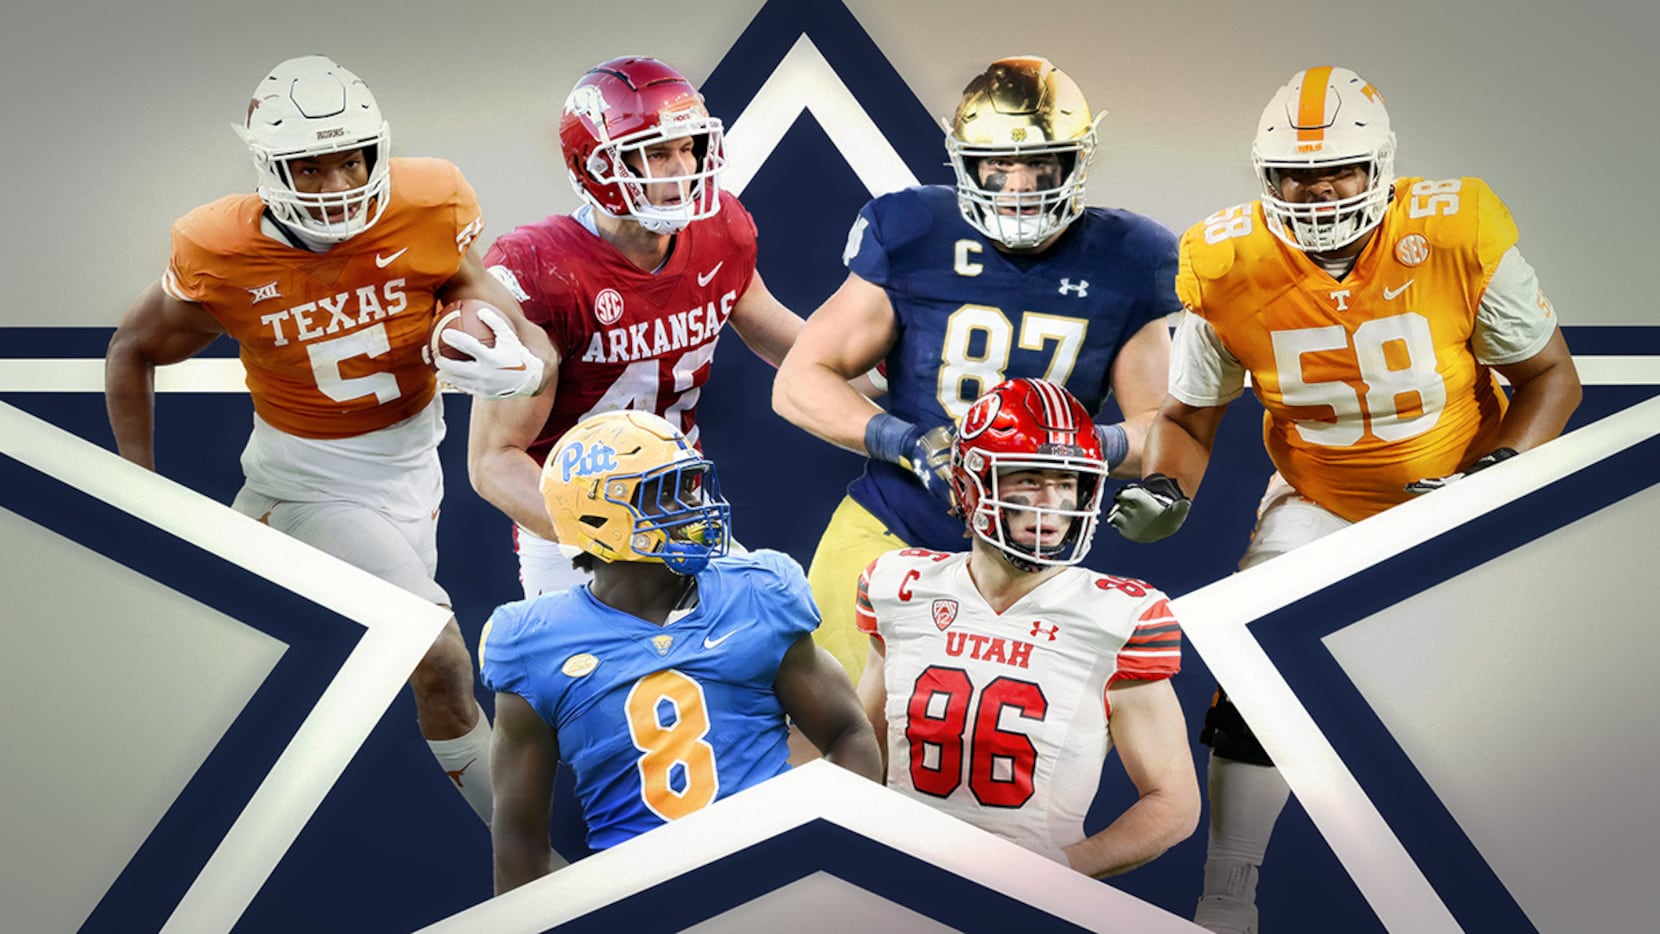 2023 NFL draft predictions: What will Cowboys do with 26th pick?